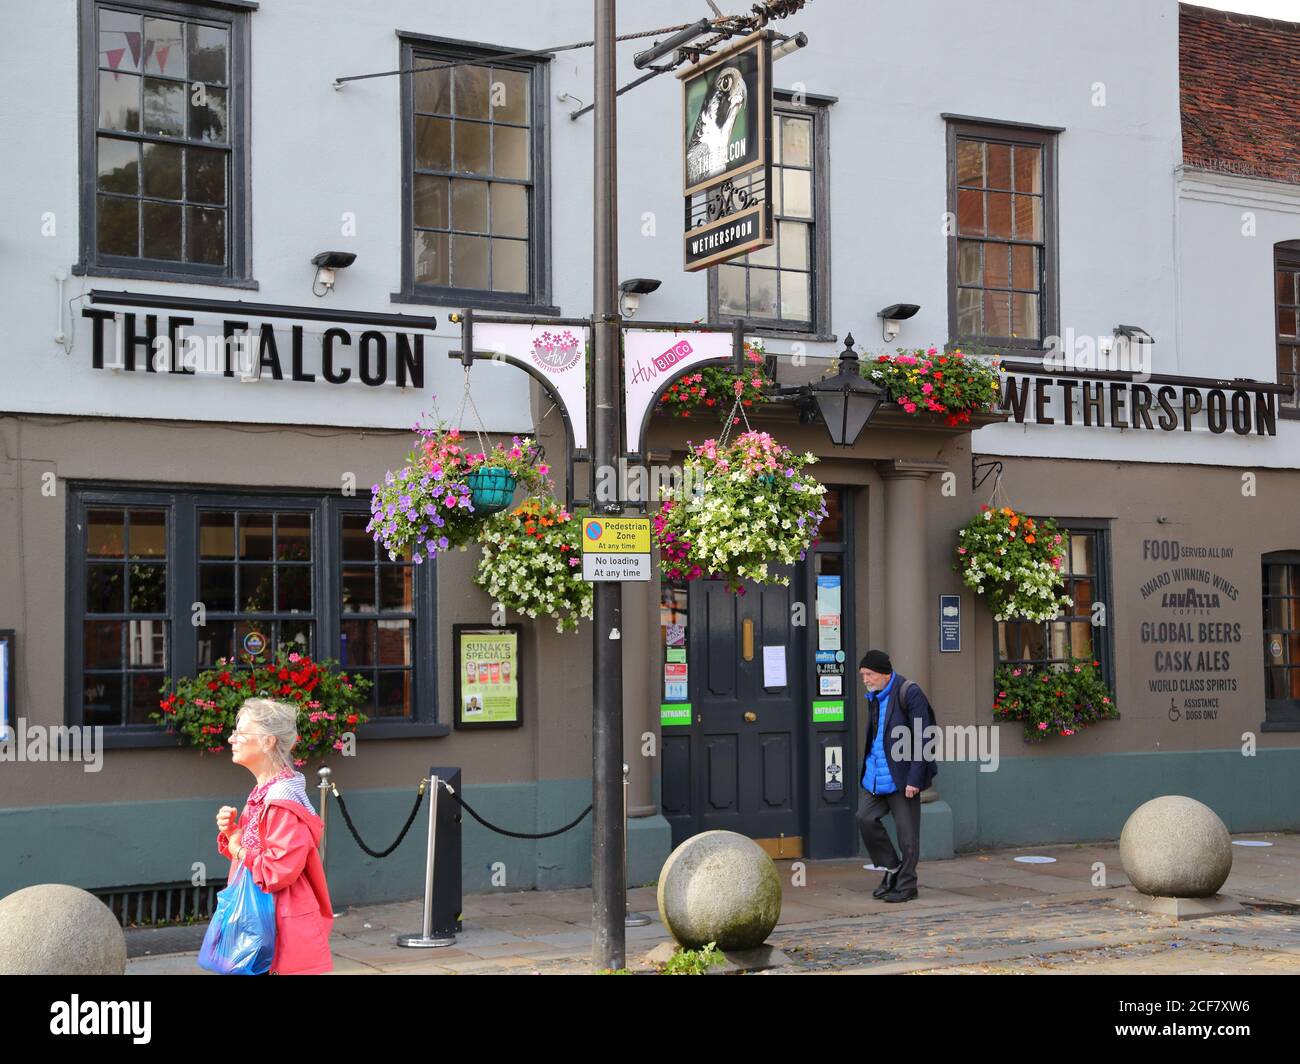 The Falcon, a Wetherspoons pub in High Wycombe, Buckinghamshire, UK Stock Photo